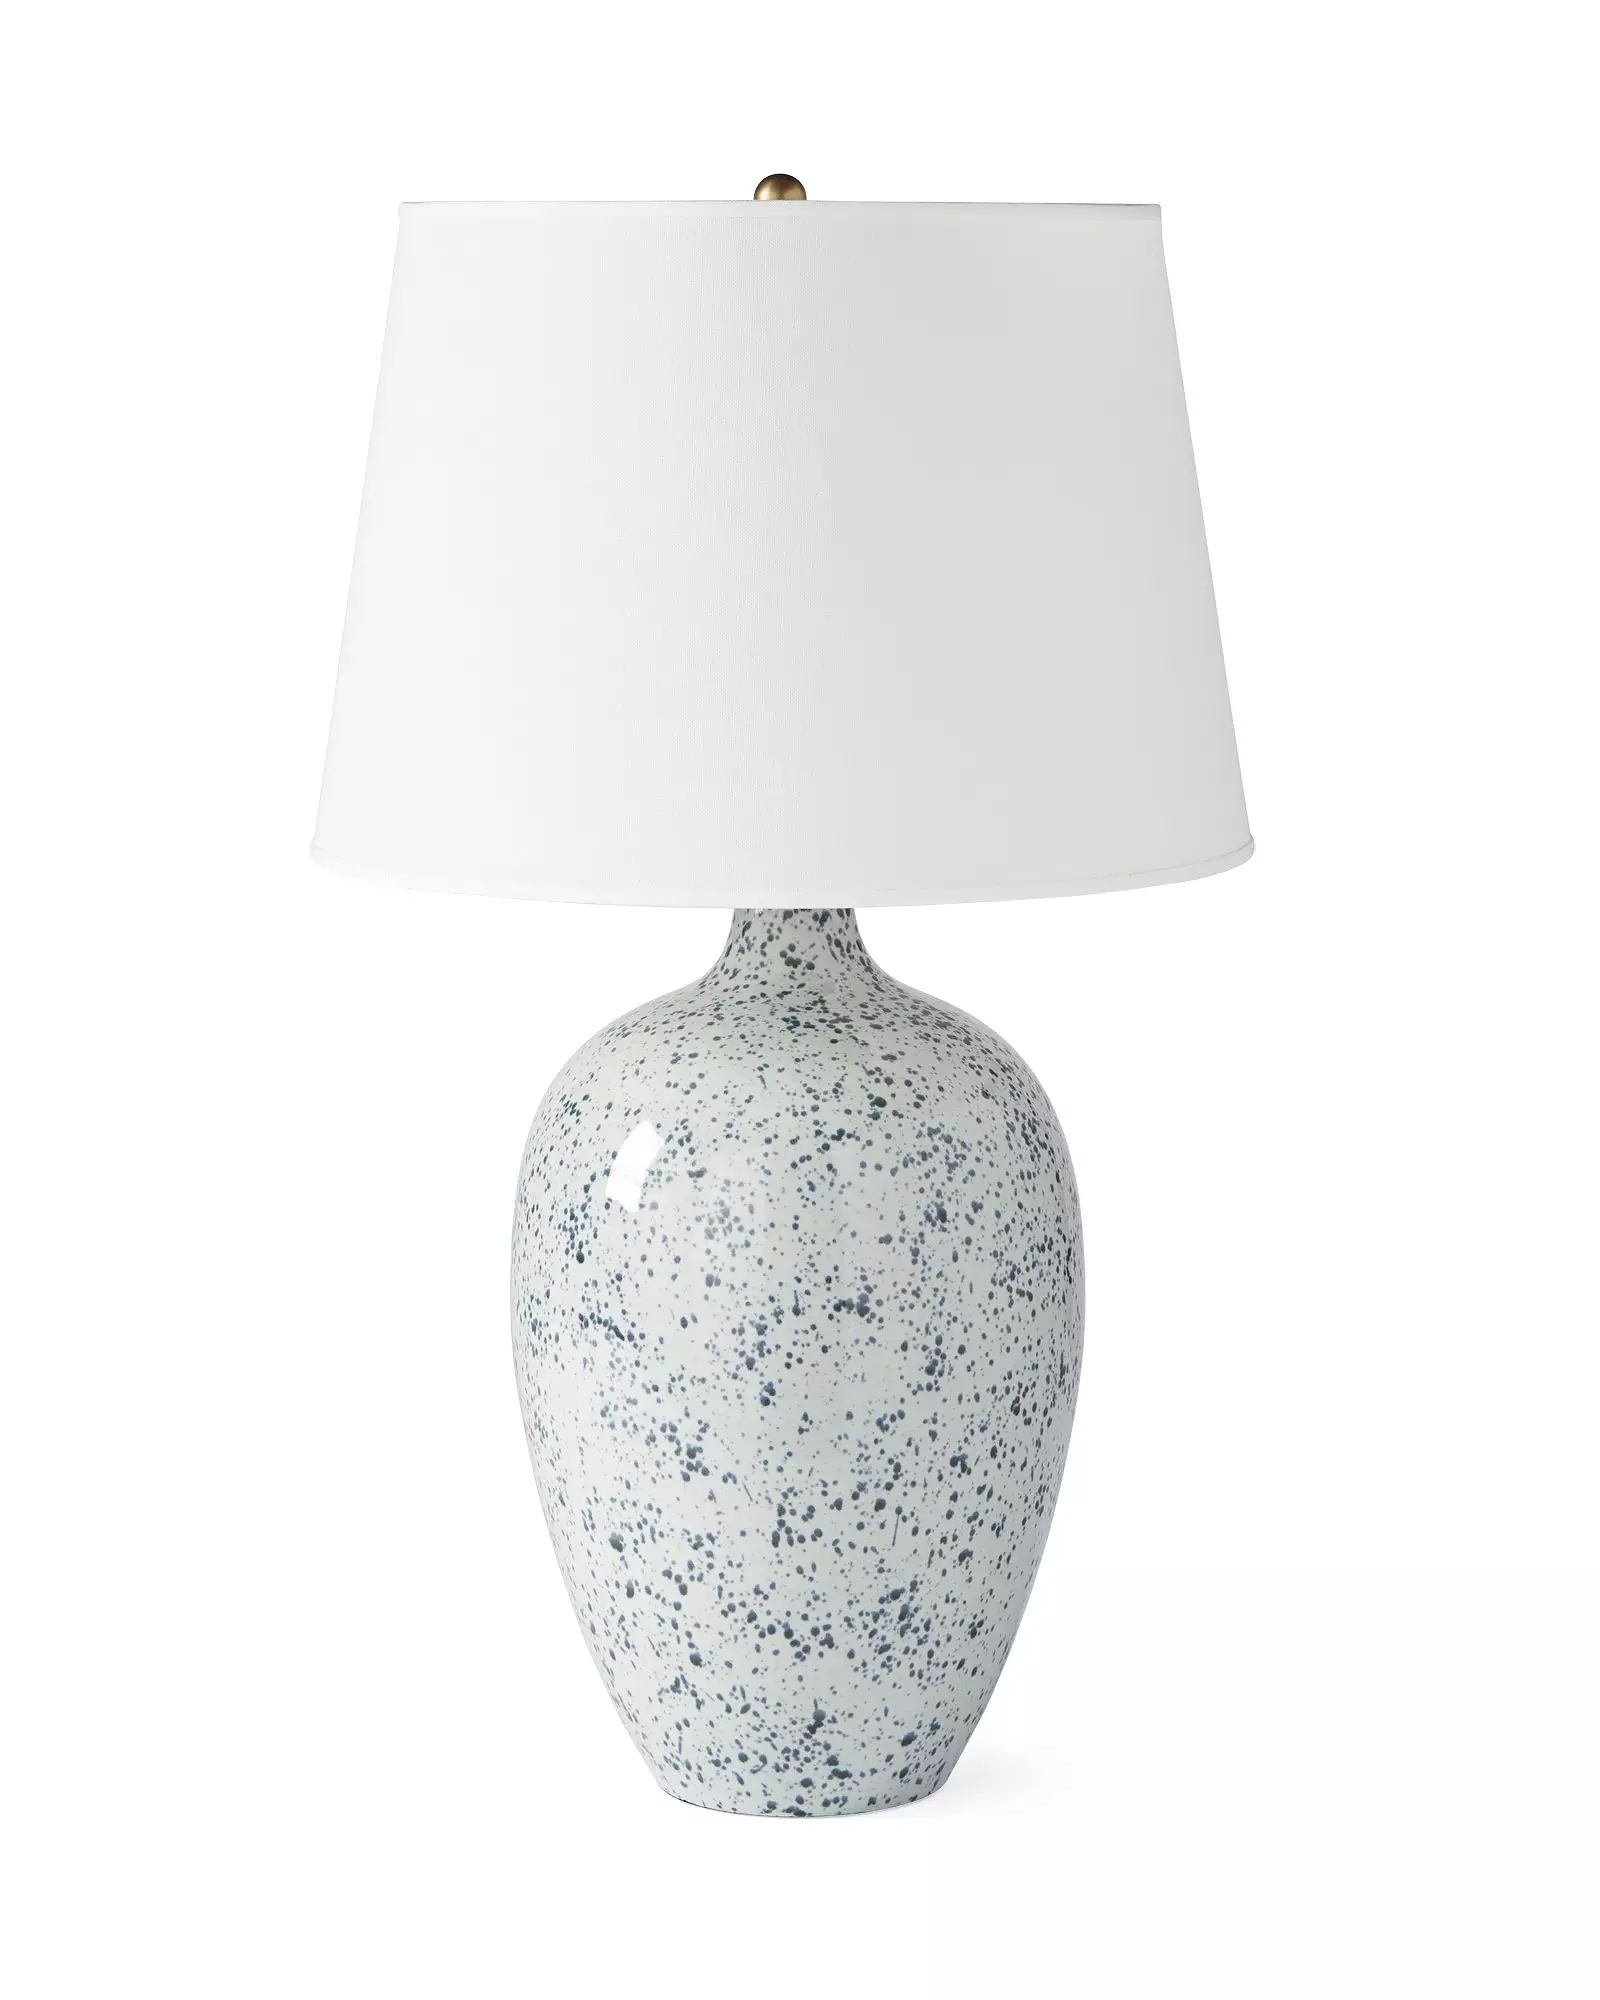 Pfeiffer Table Lamp | Serena and Lily